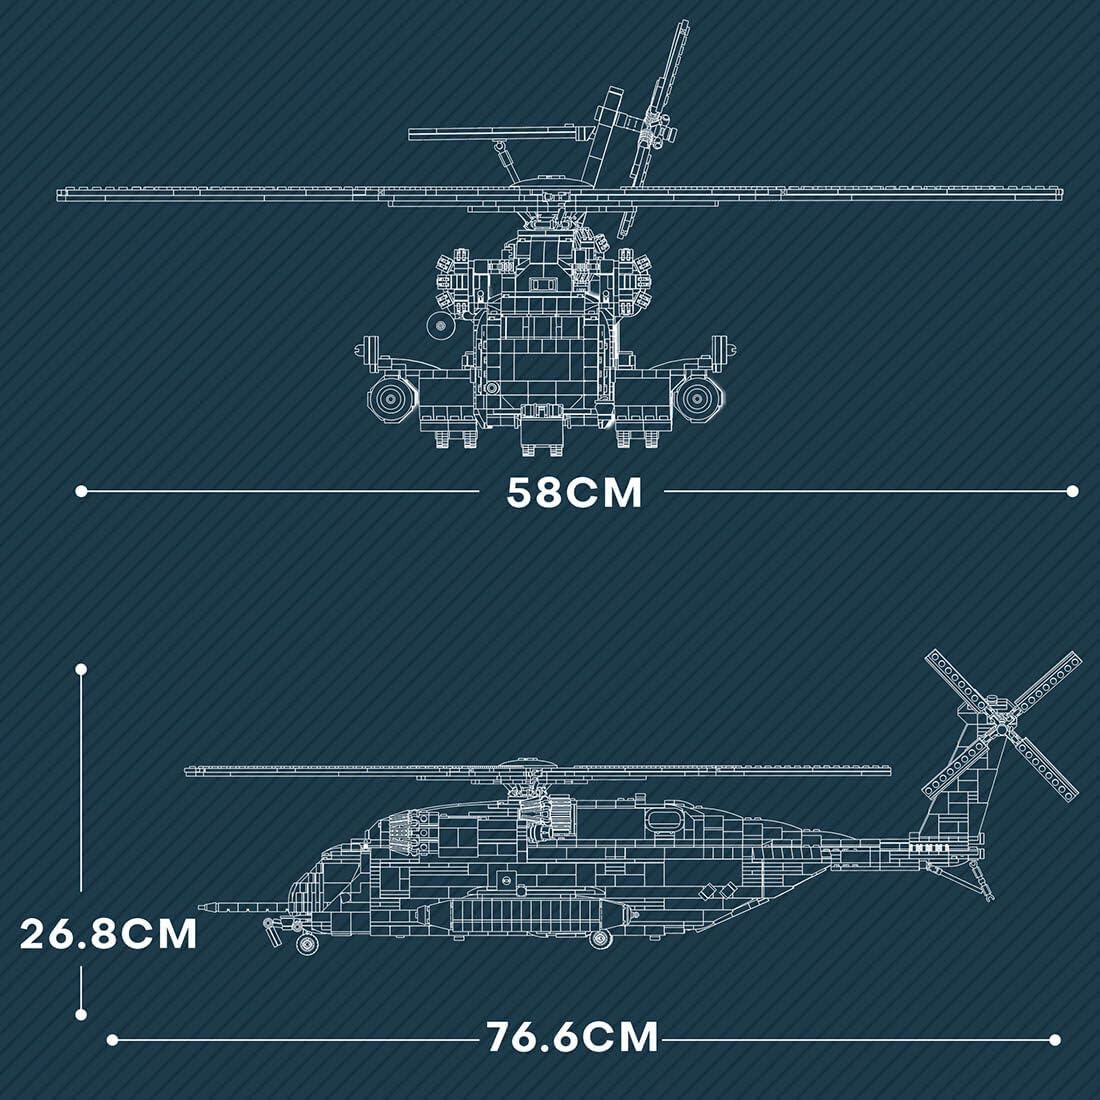 Military Army Airplane Building Toy, 1/35 CH-53E Super Sea Stallion Military Helicopter Building Blocks, MOC-127265 Aircraft Model Plane Bricks Toy, 2192PCS